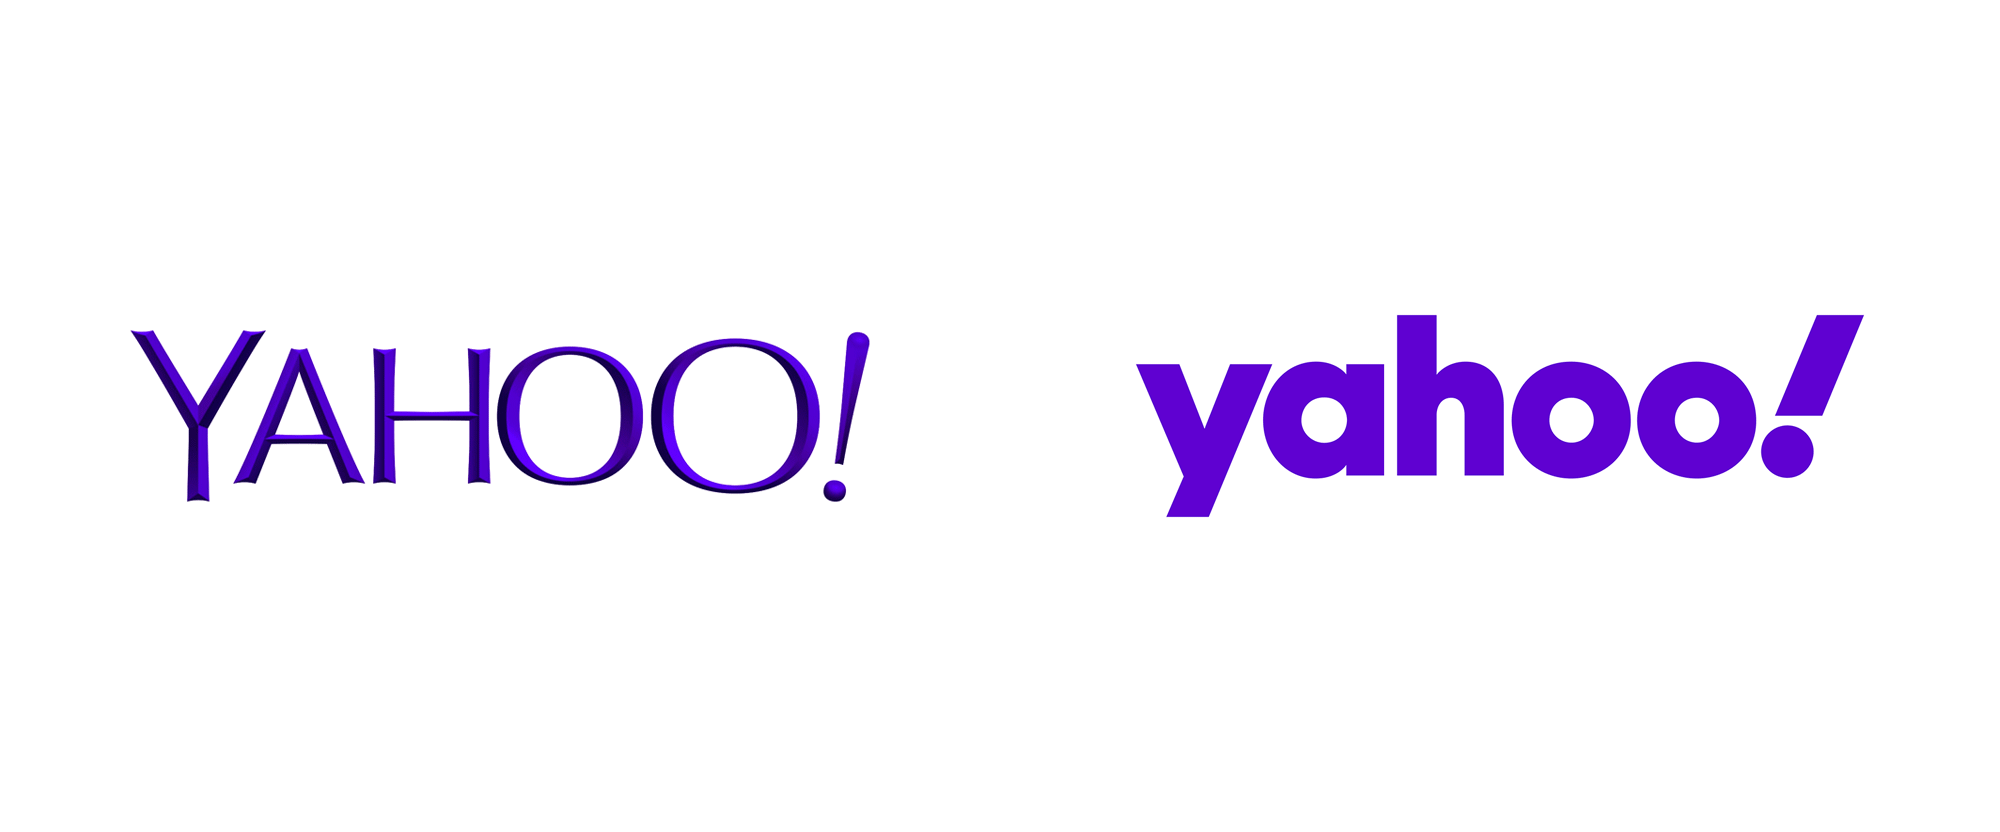 3 Tips For Keeping Your Yahoo